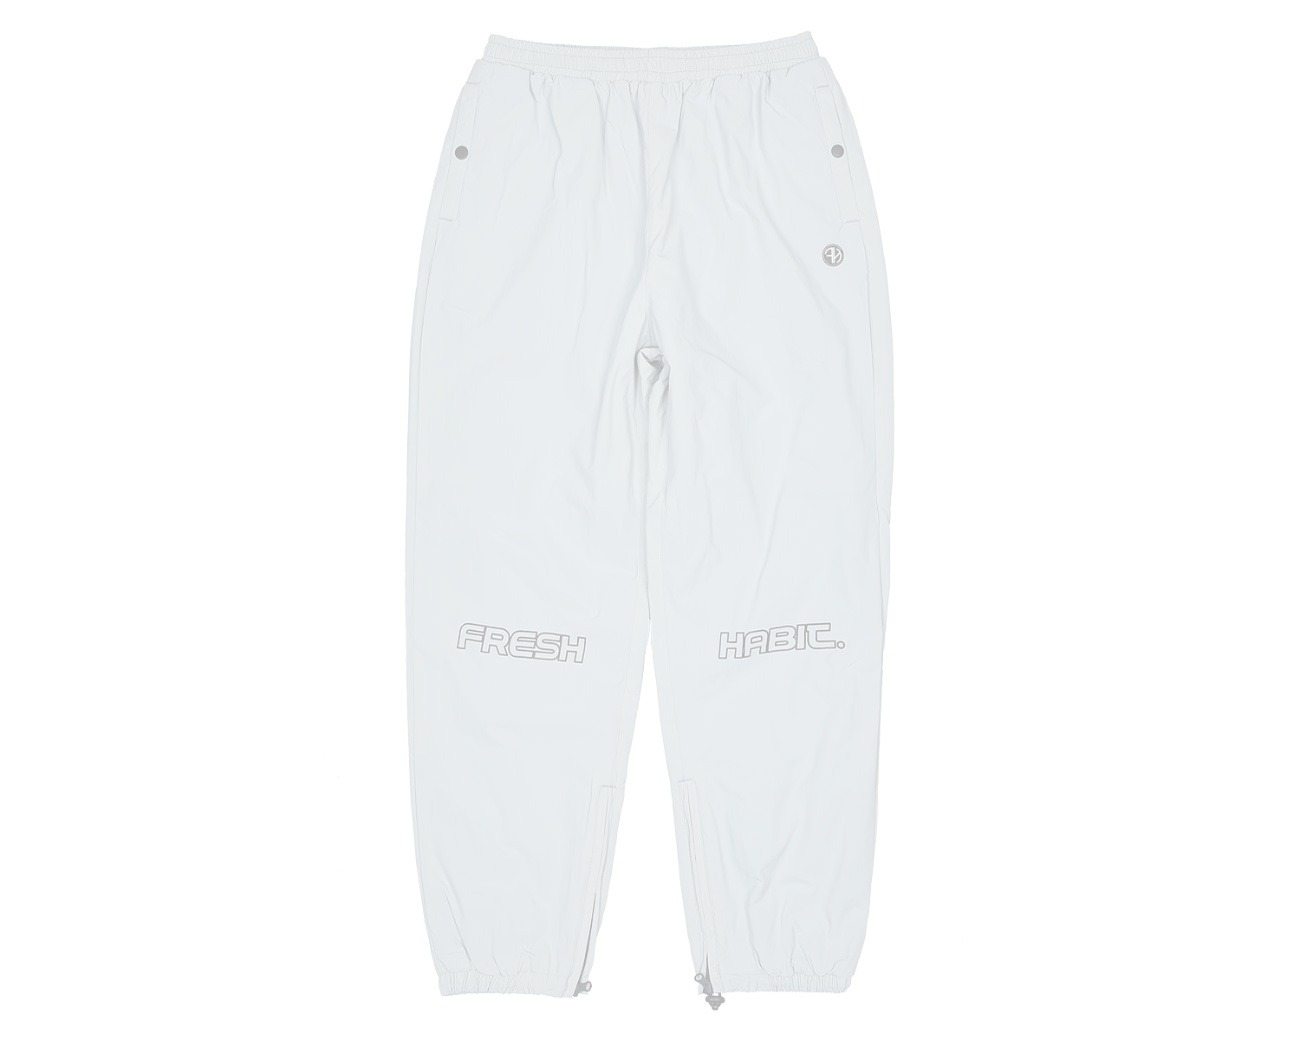 FH TRACK PANTS WHITEGRAY / GAFH